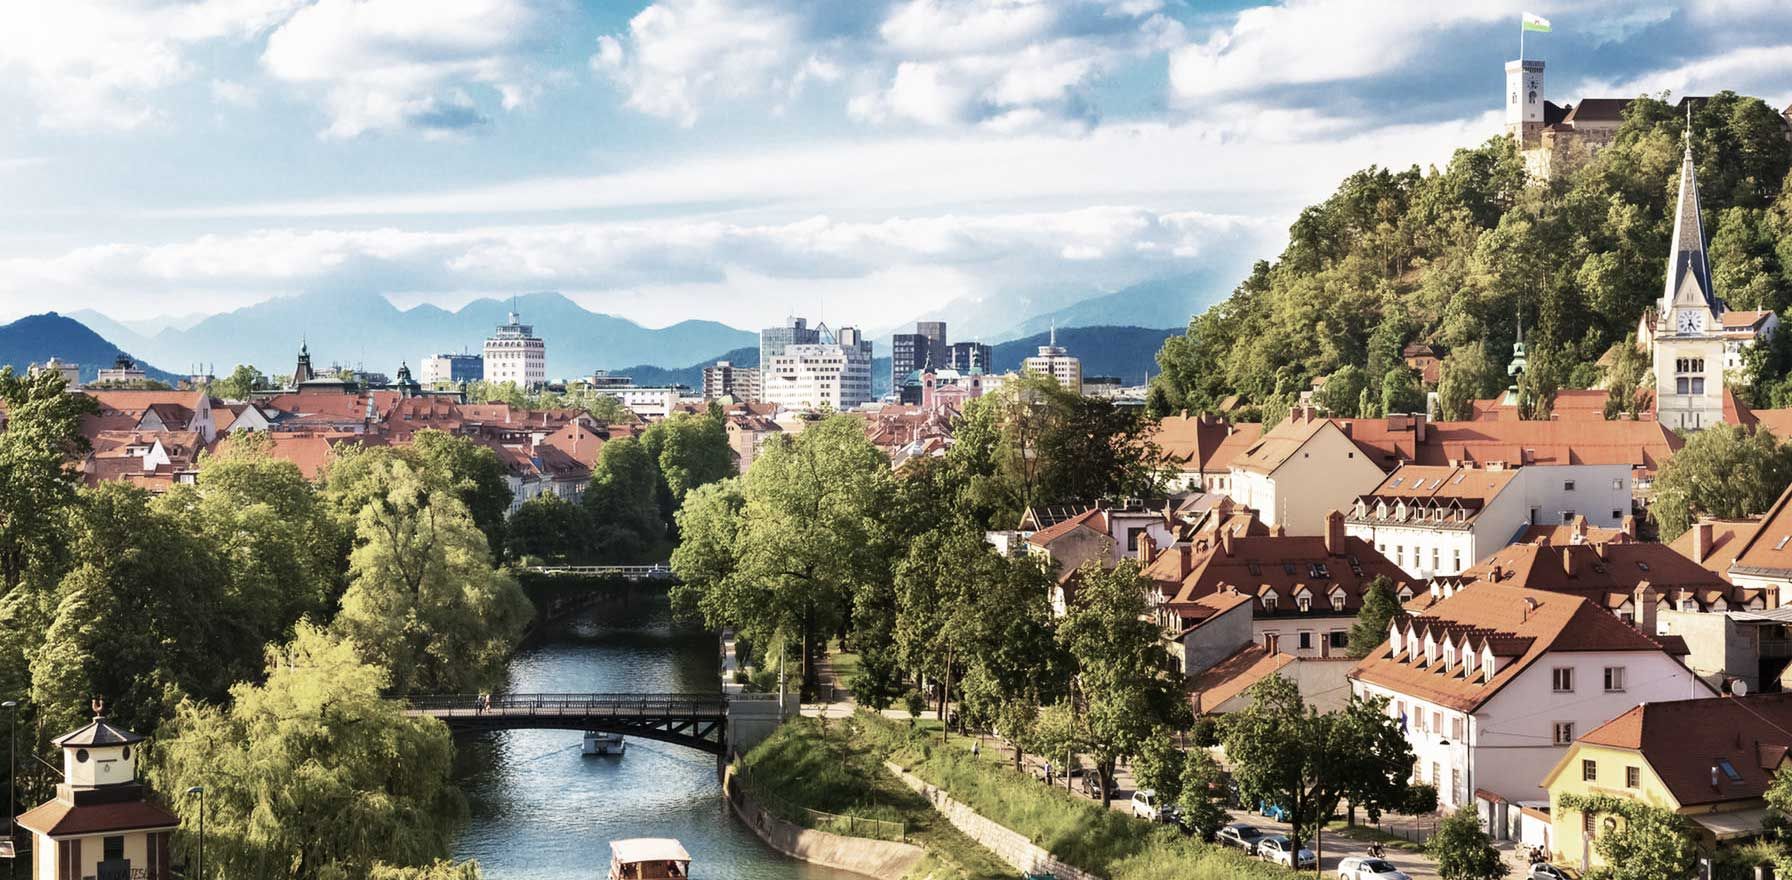 Ljubljana is a small but picturesque city